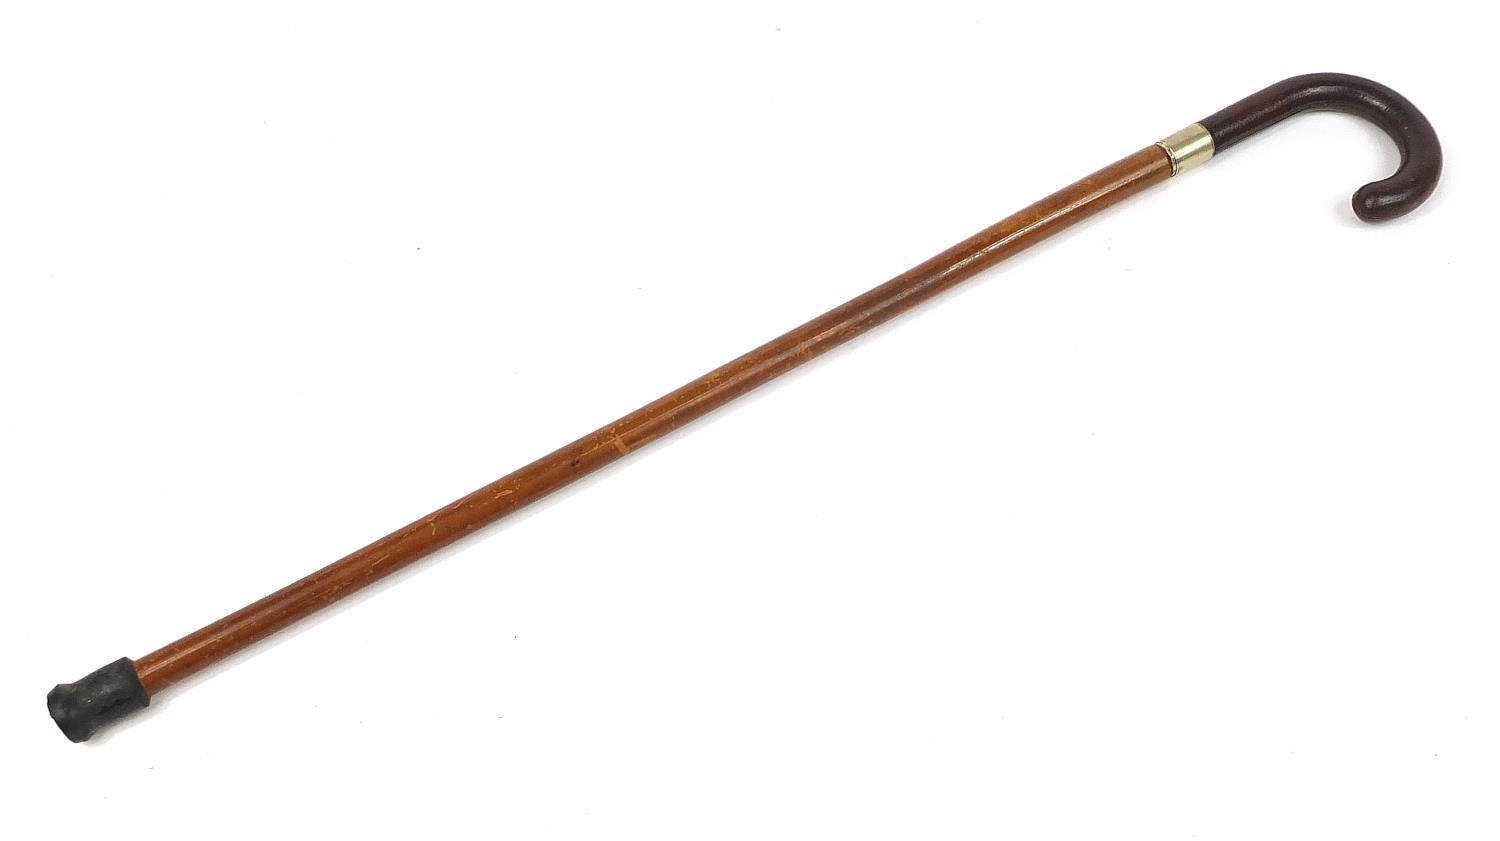 Malacca swordstick with leather handle and steel blade, 93cm in length - Image 5 of 5